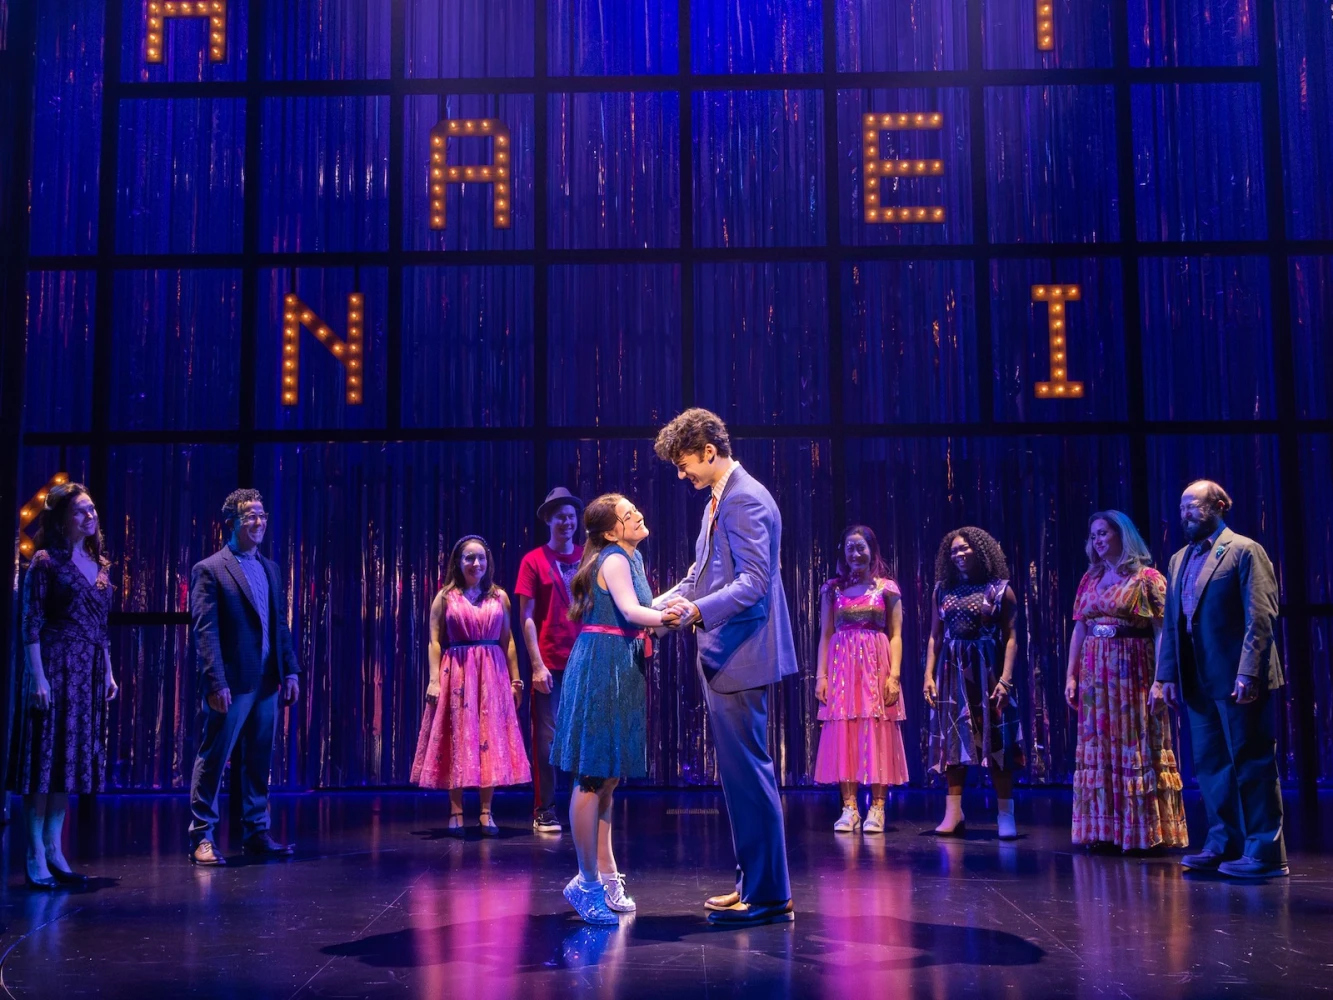 How to Dance in Ohio on Broadway: What to expect - 2